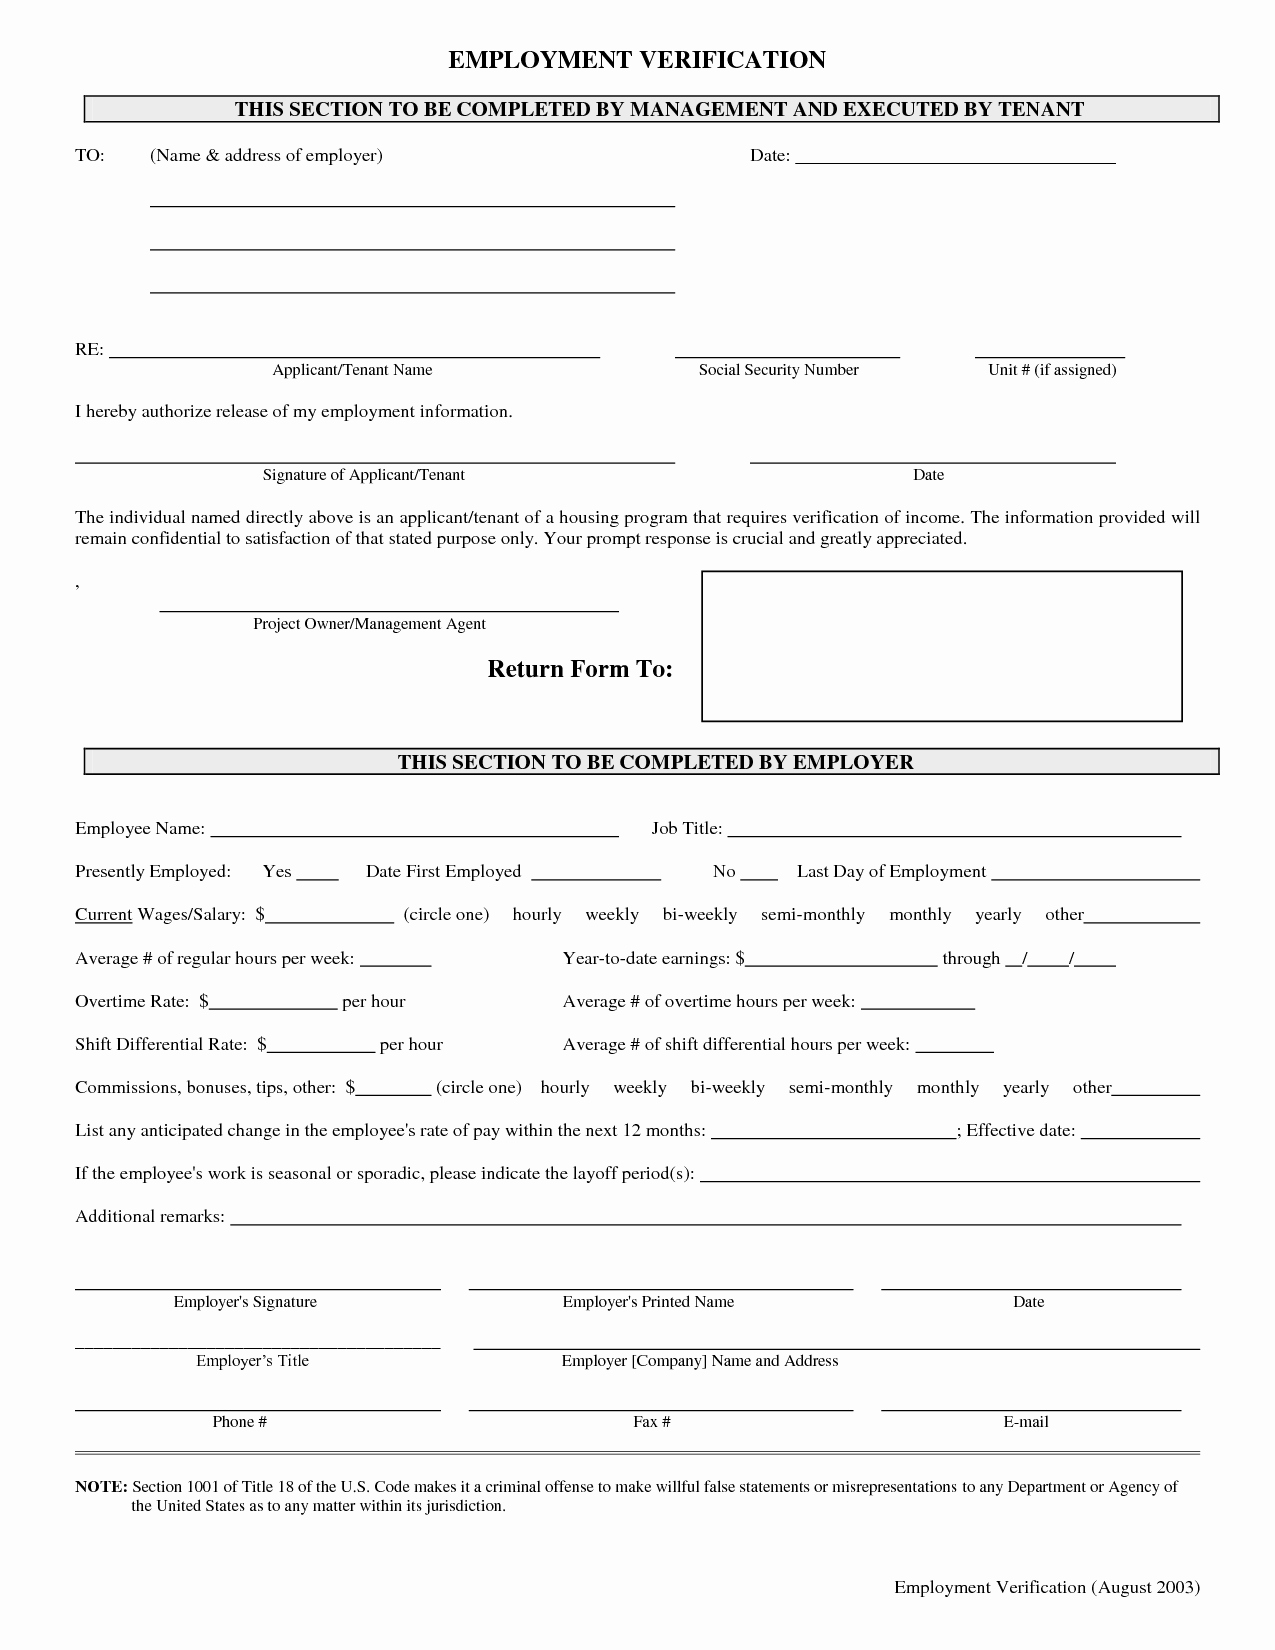 Employment Verification forms Template New Free Printable Verification Employment form